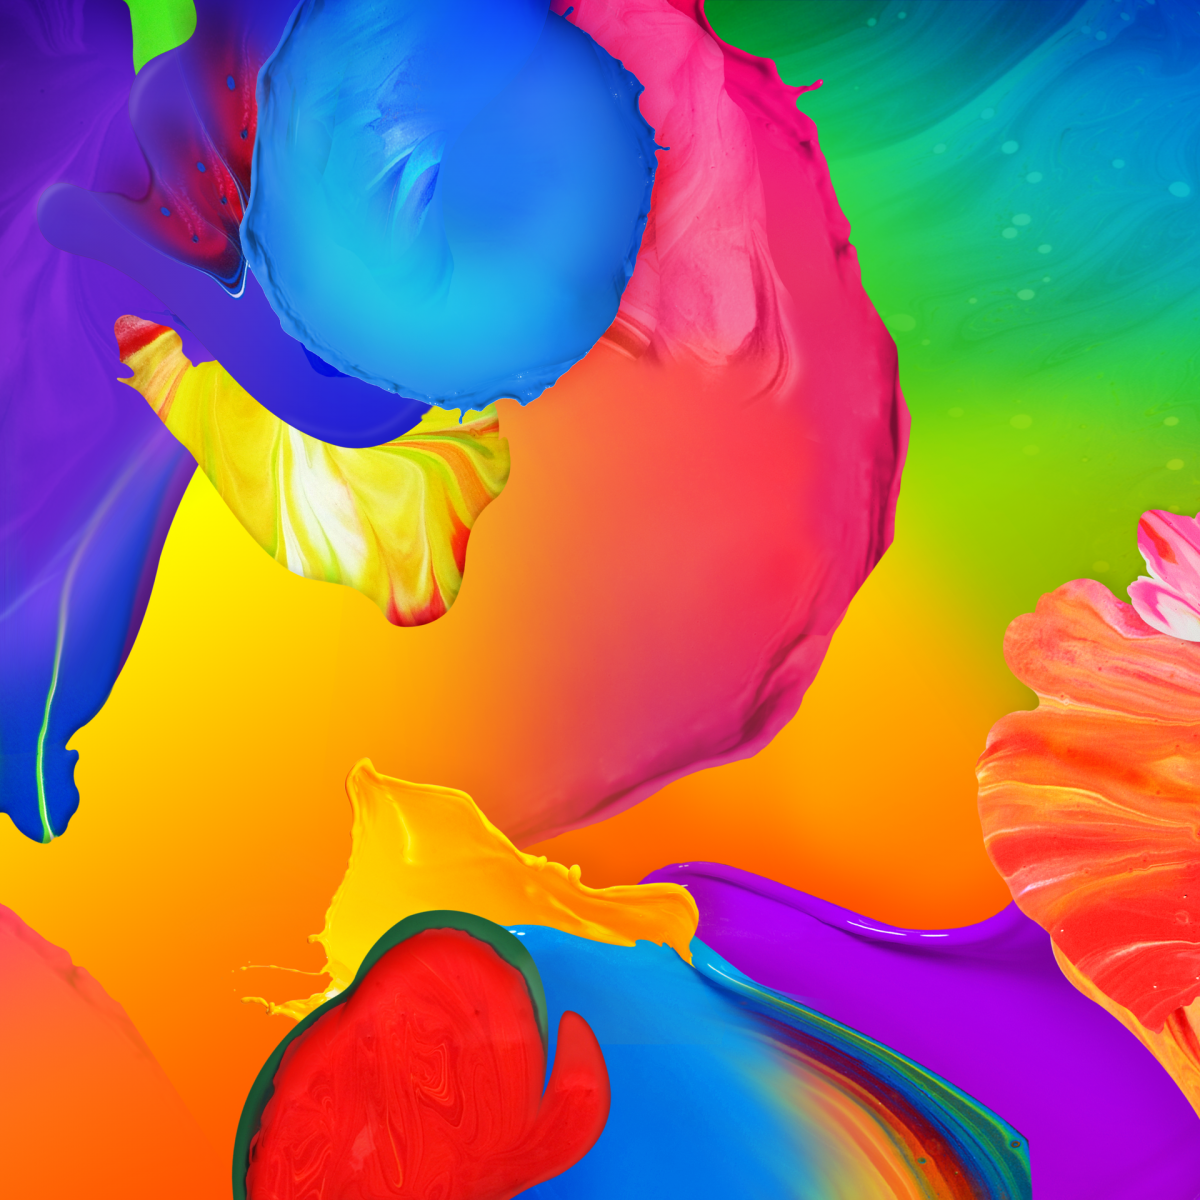 Download Get all the Samsung Galaxy S5 wallpapers here Now